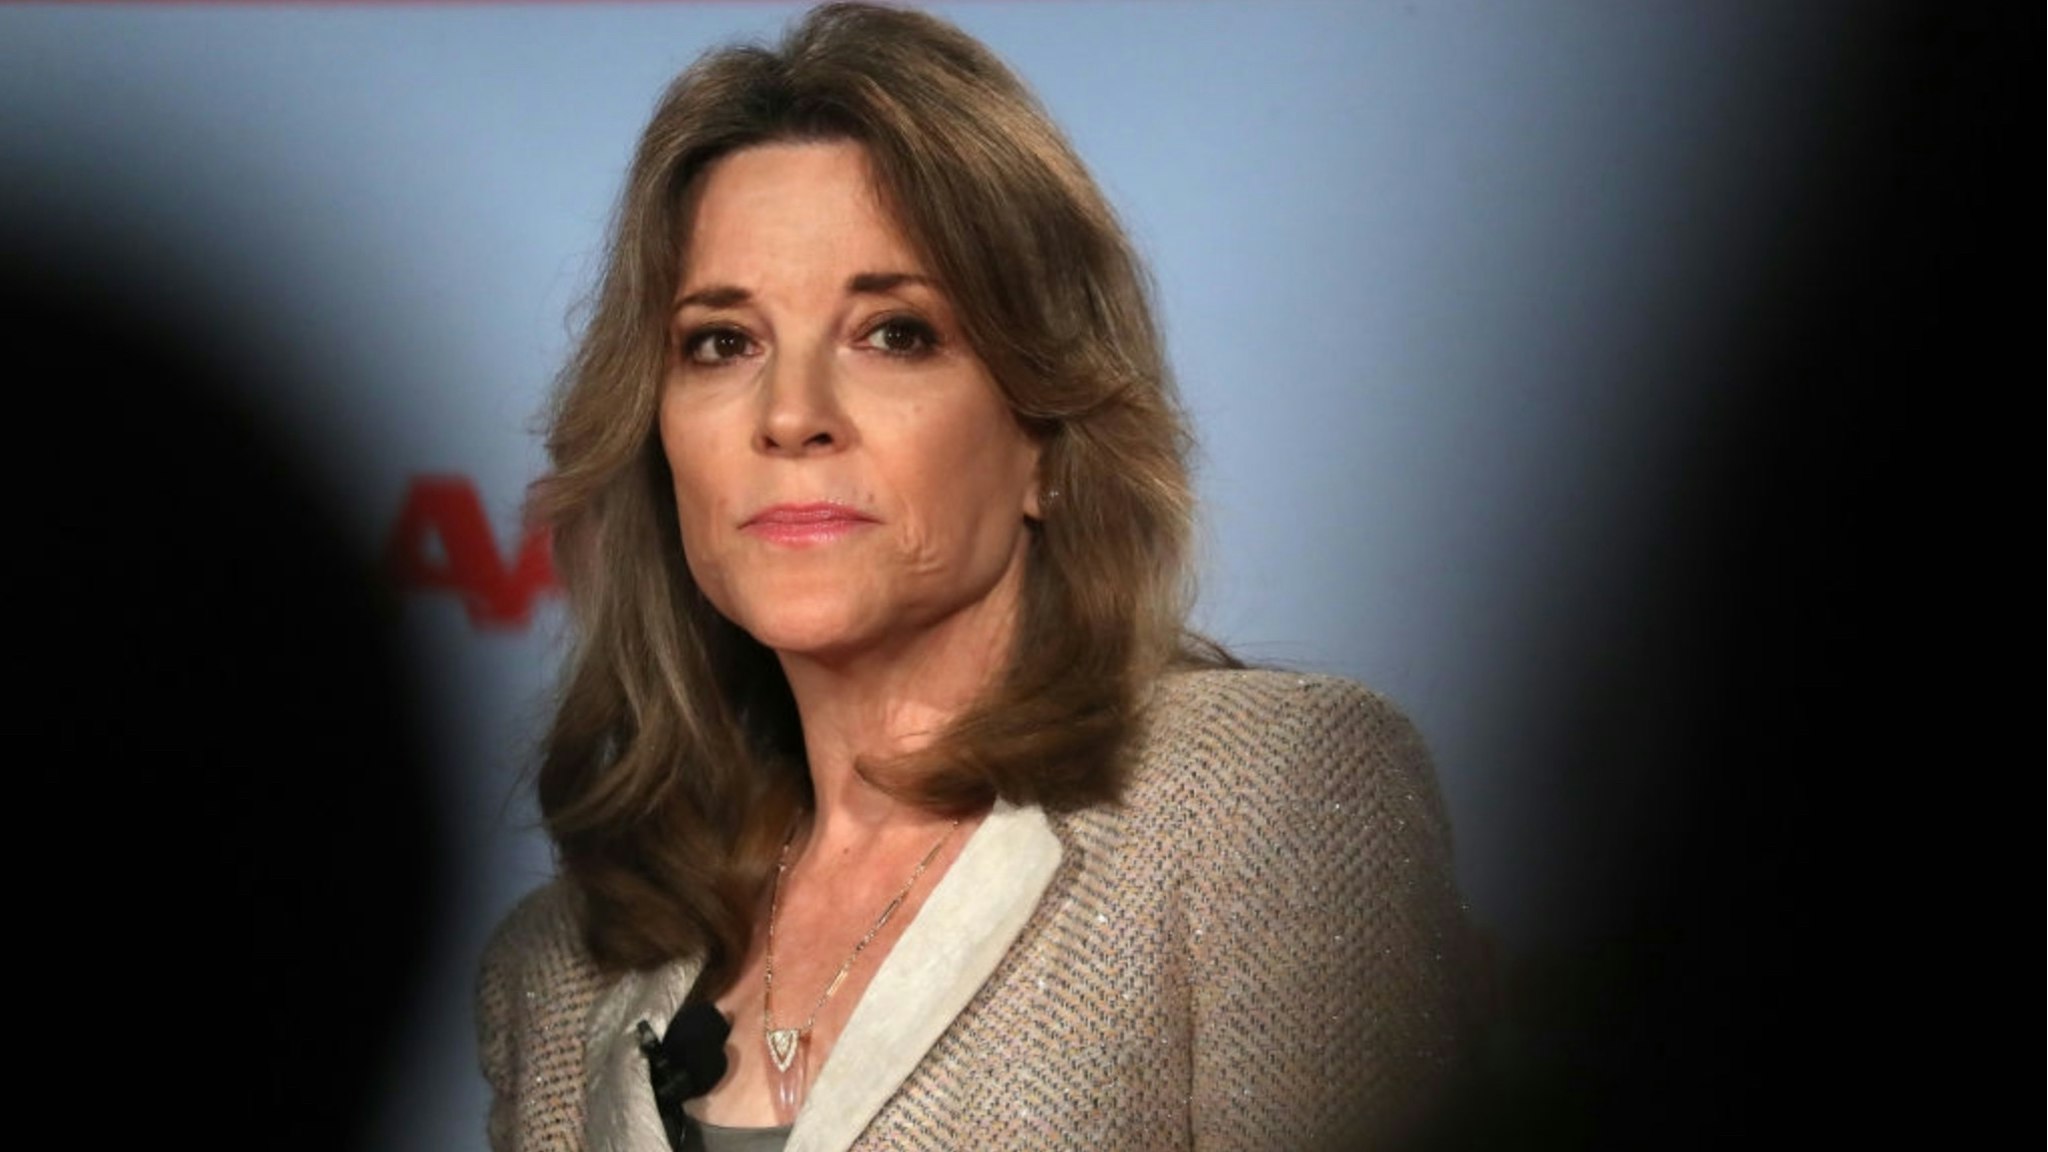 Democratic presidential hopeful self-help author Marianne Williamson speaks during the AARP and The Des Moines Register Iowa Presidential Candidate Forum on July 19, 2019 in Sioux City, Iowa.